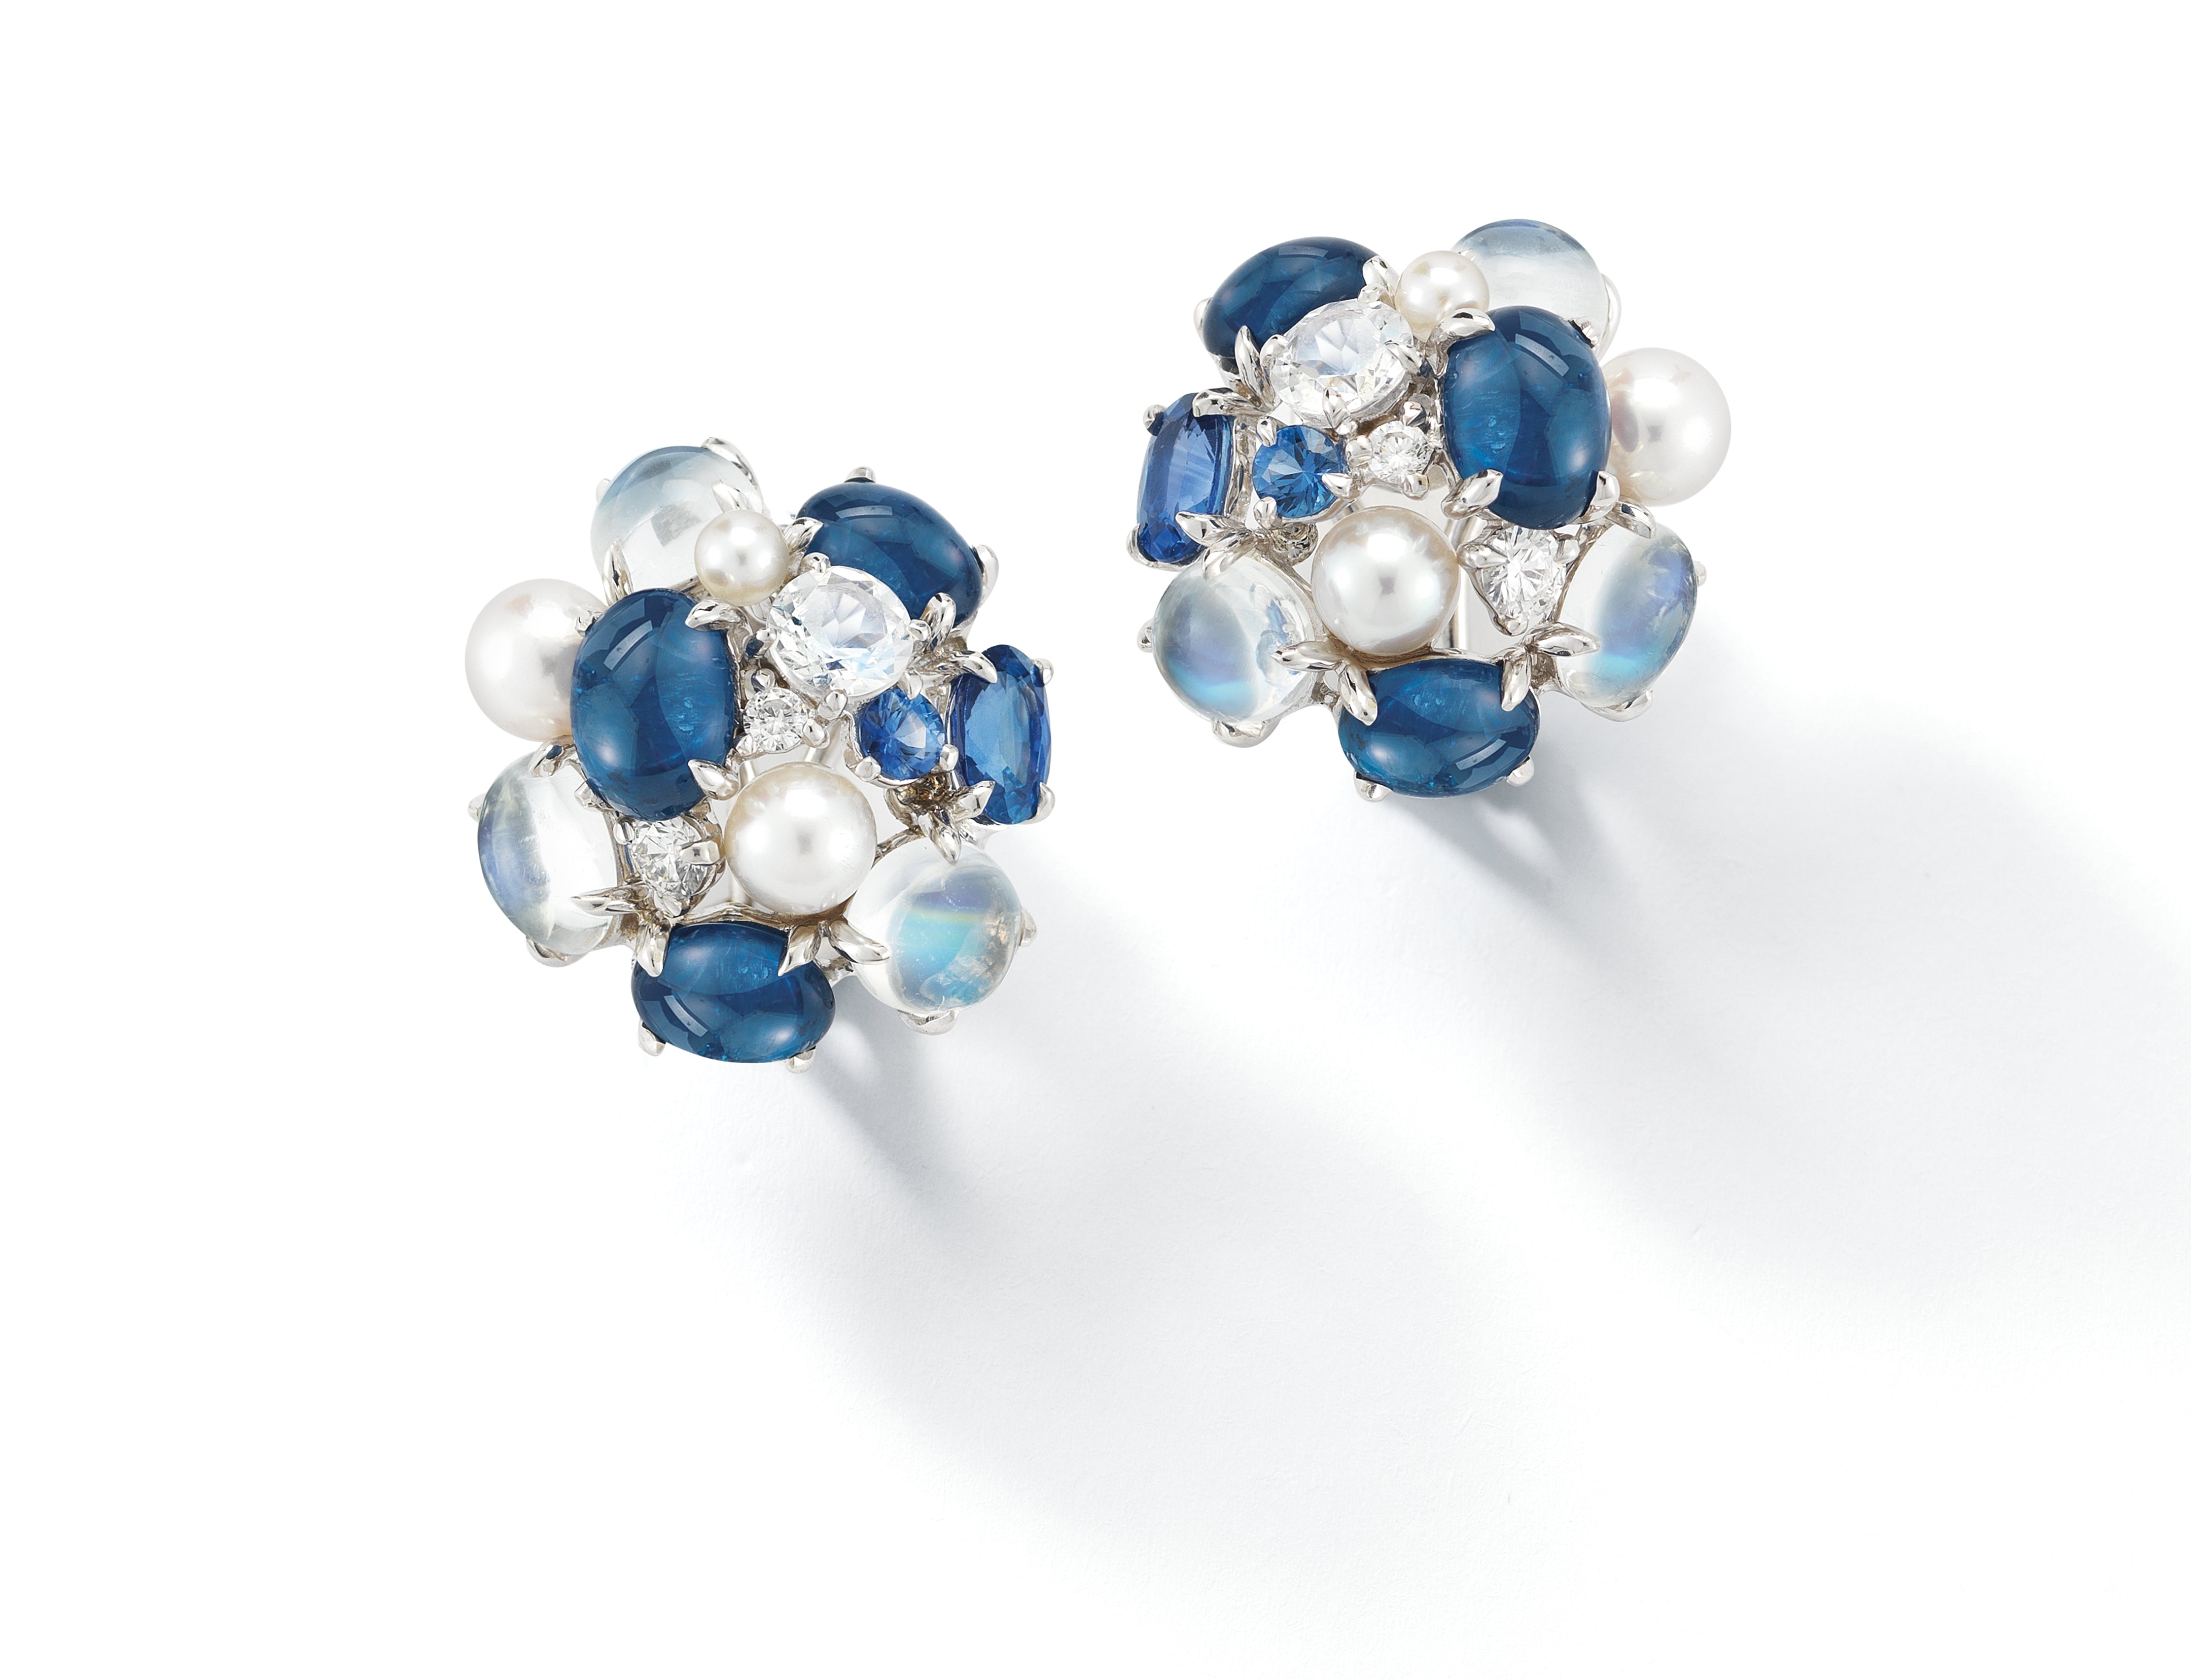 A pair of Small Bubble Earrings with Moonstone, Sapphire, Pearl and Diamond set in 18K White Gold. Signed Seaman Schepps.